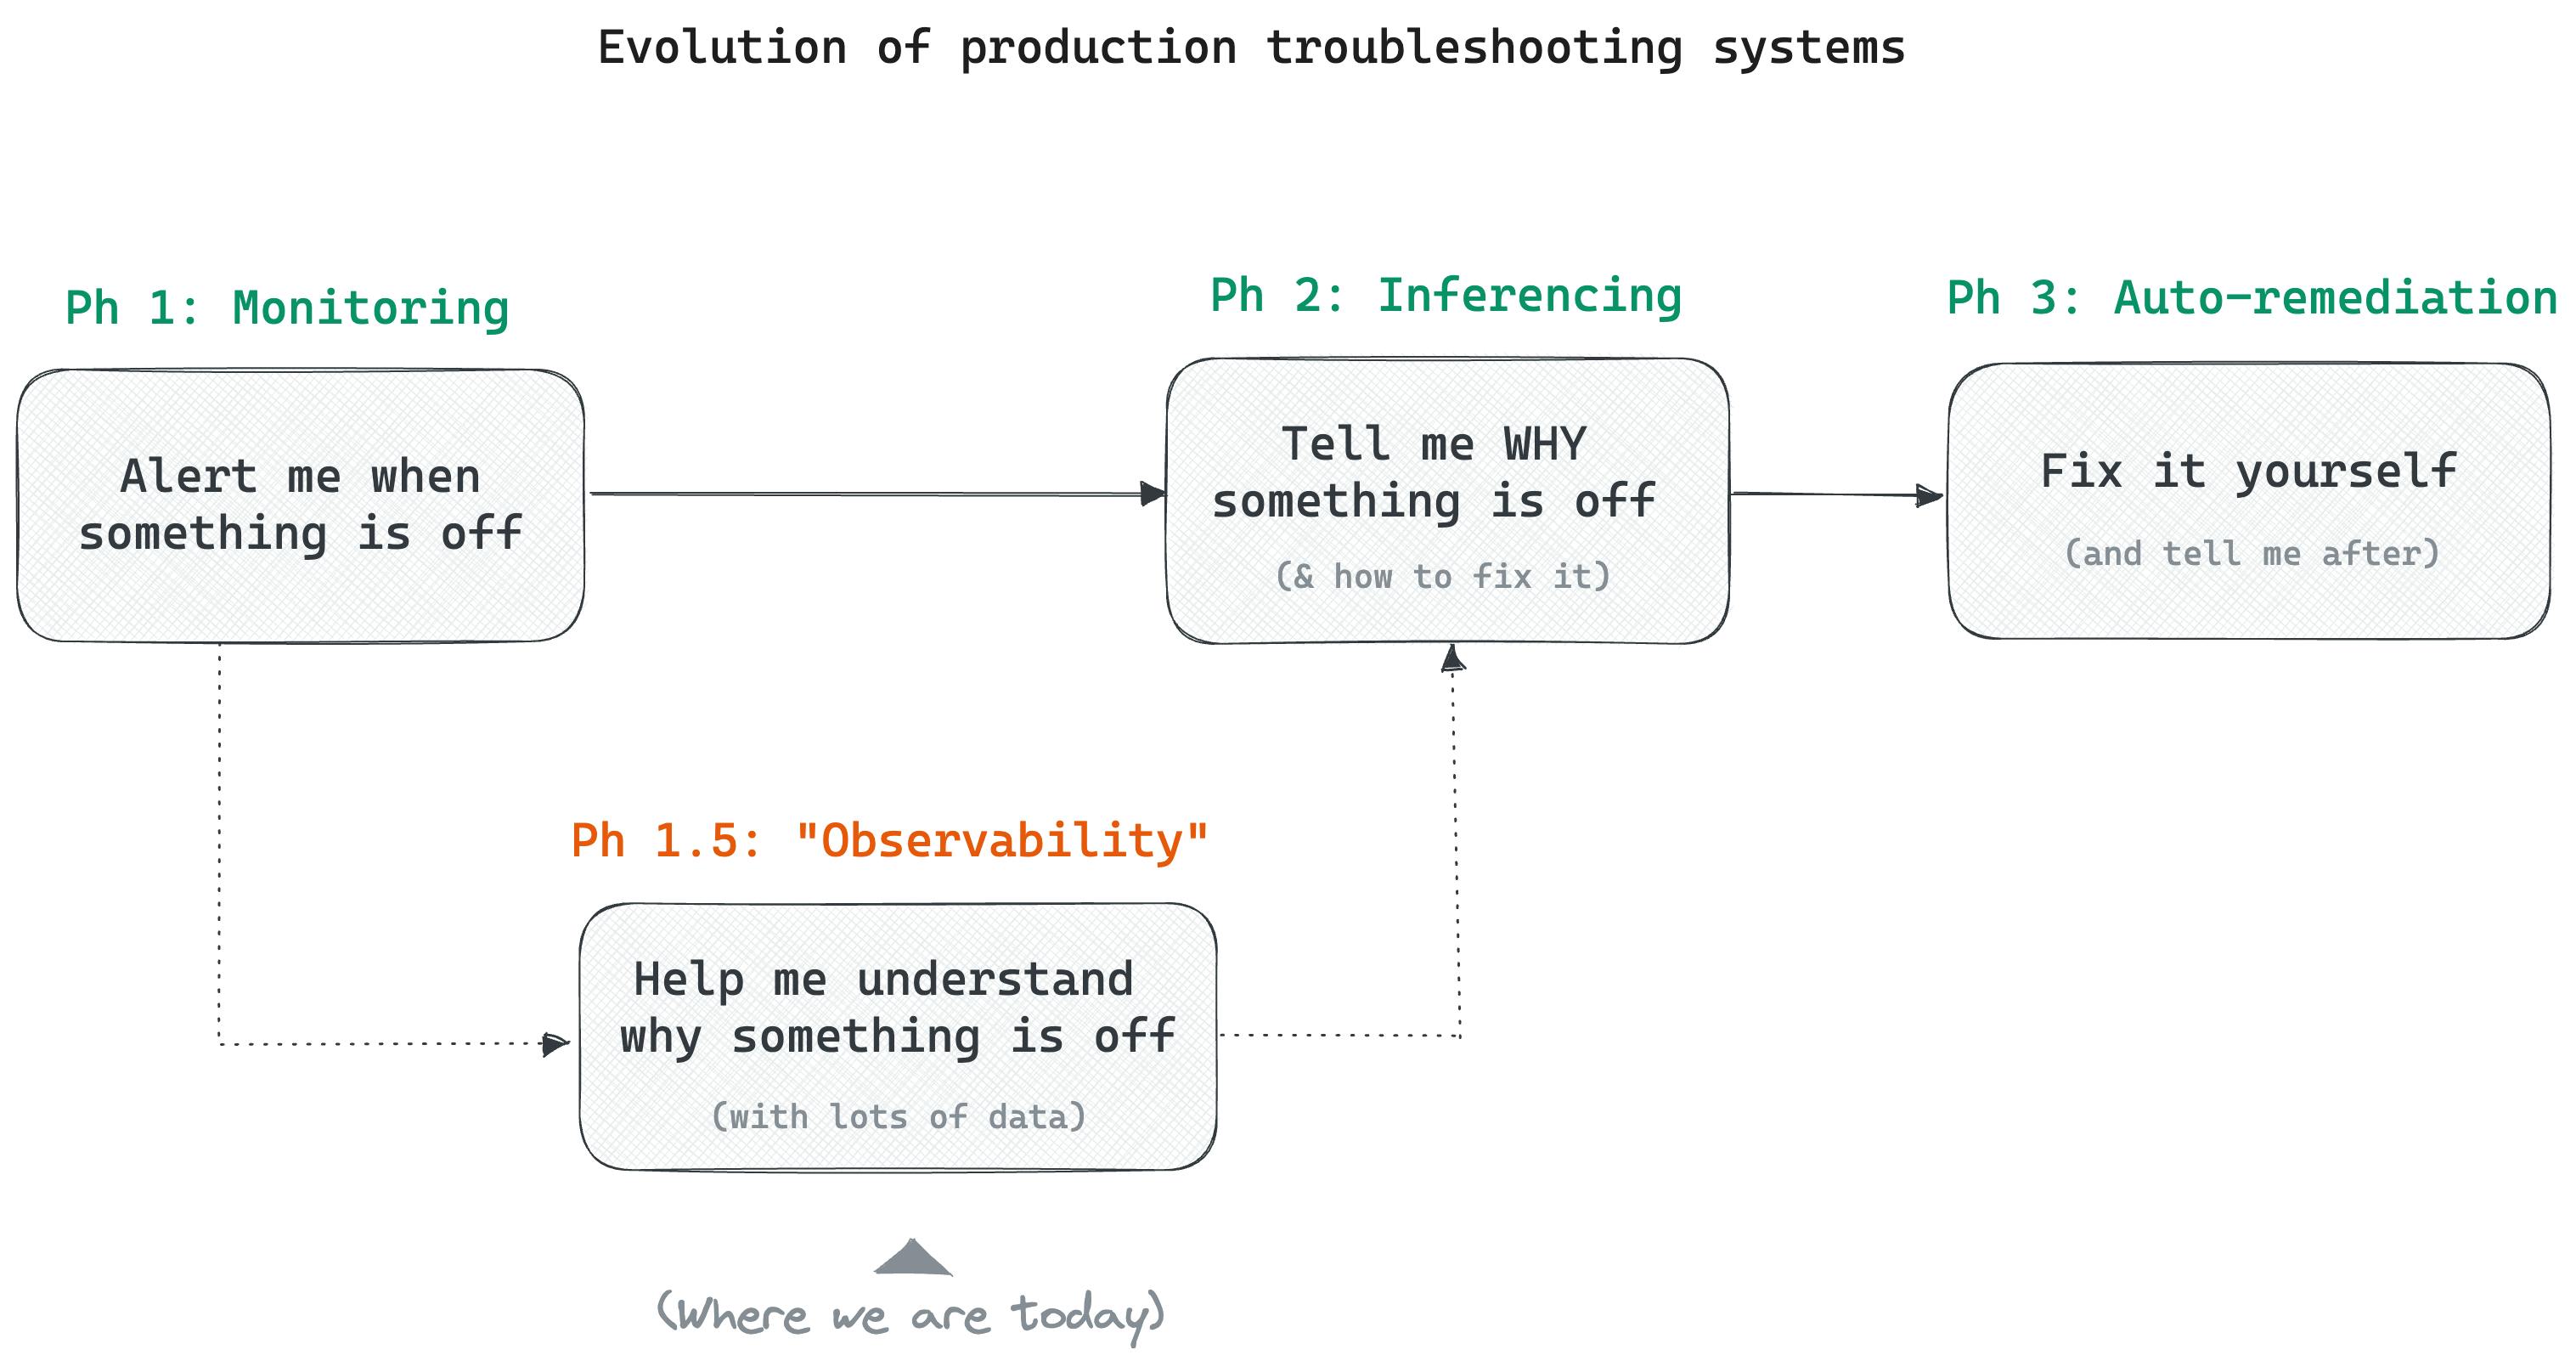 Observability vs Inferencing